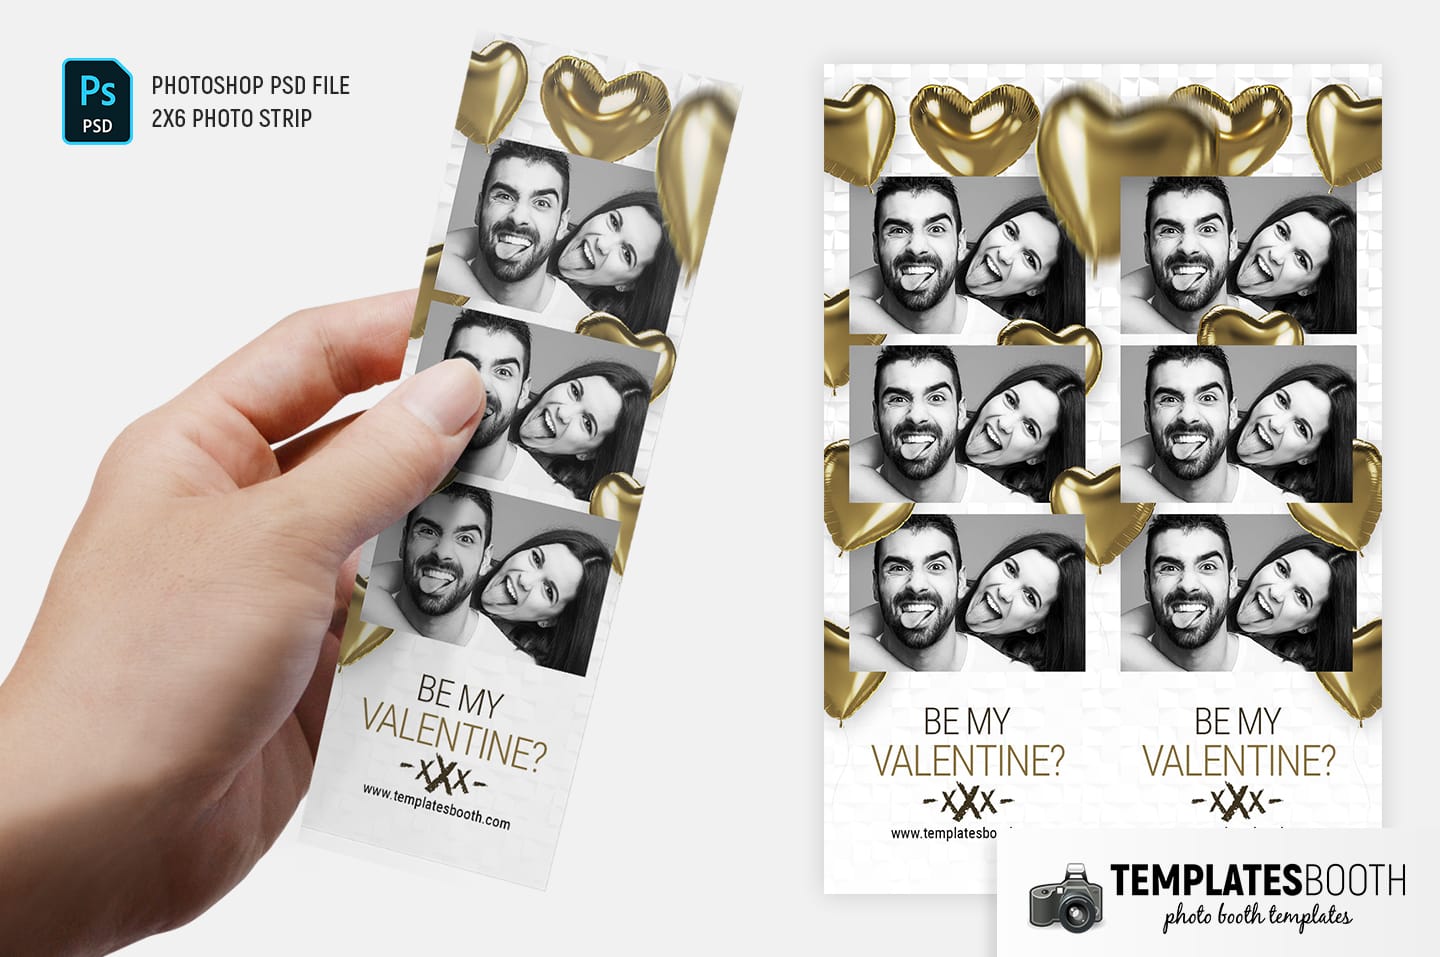 Be My Valentine Photo Booth Template (2x6 photo strip)